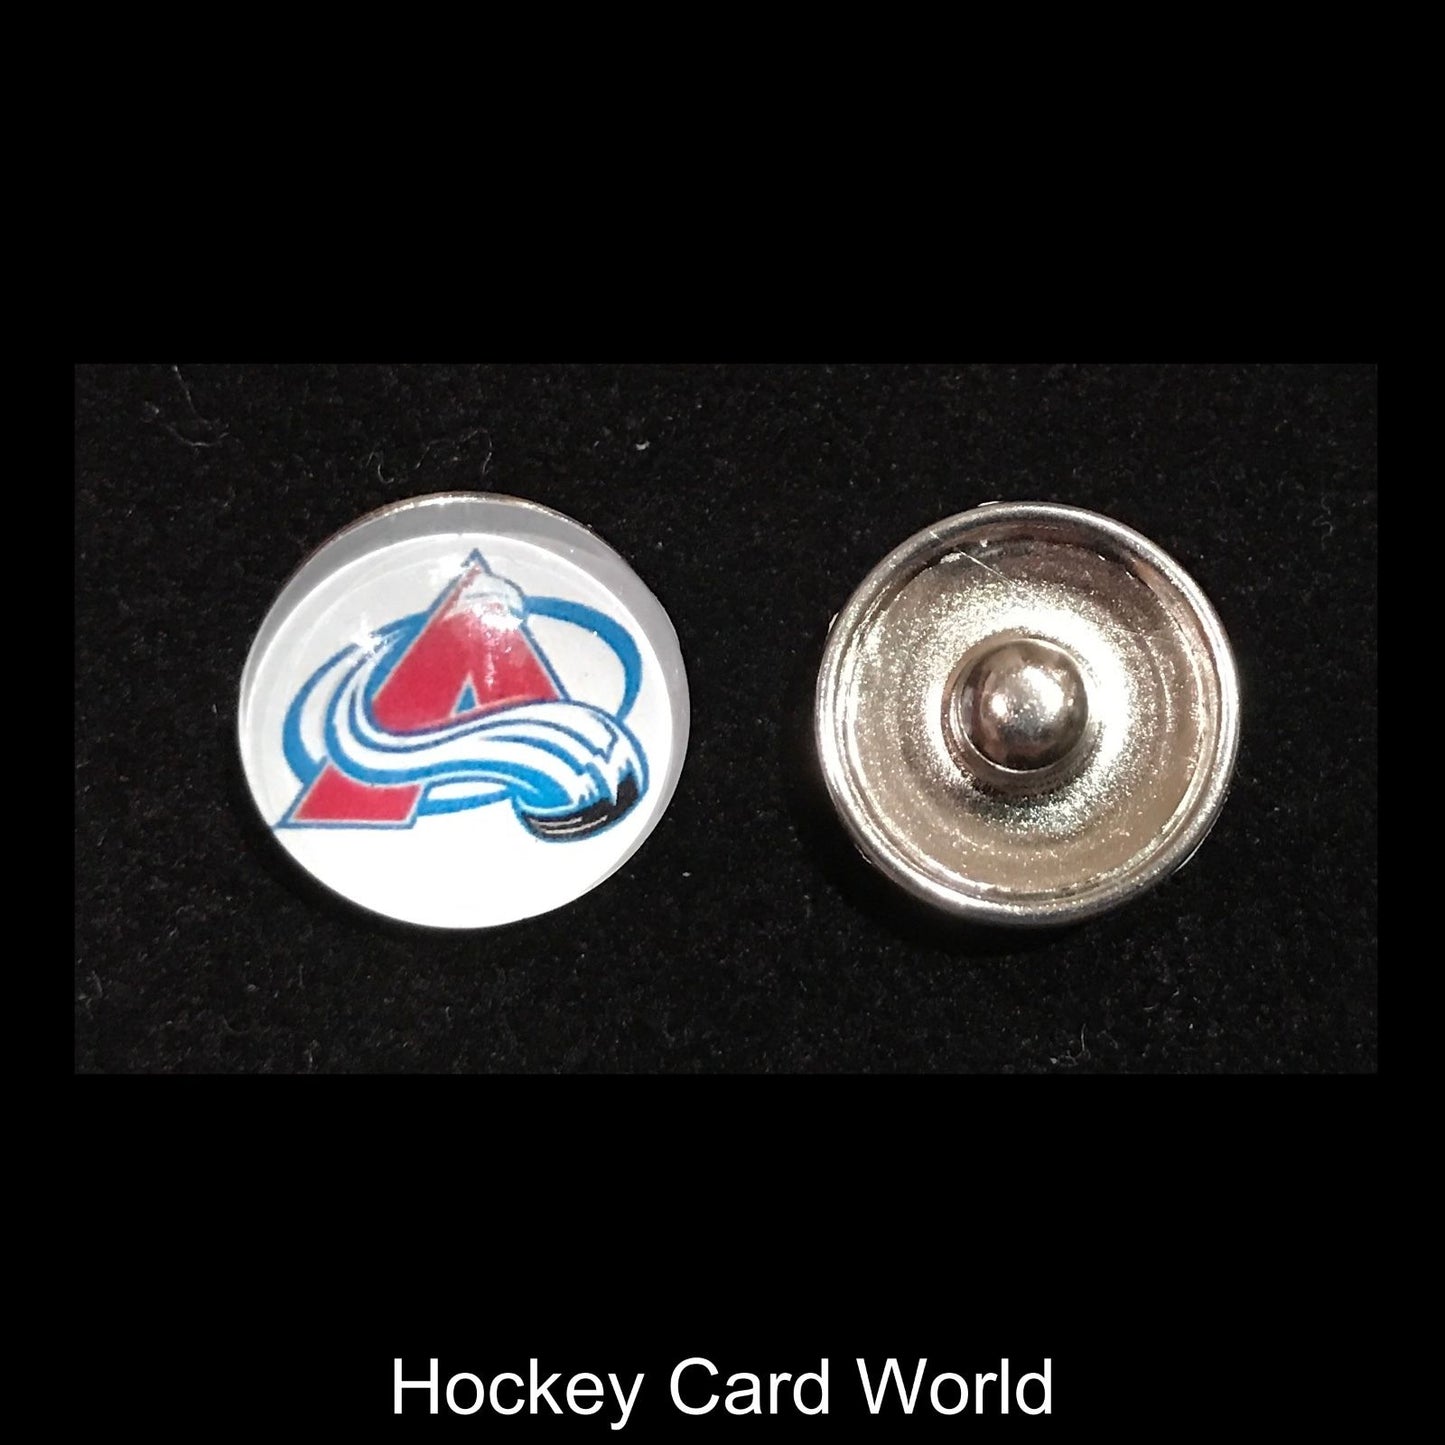  Colorado Avalanche NHL Snap Ginger Button Jewelry for Jackets, Bracelets Image 1